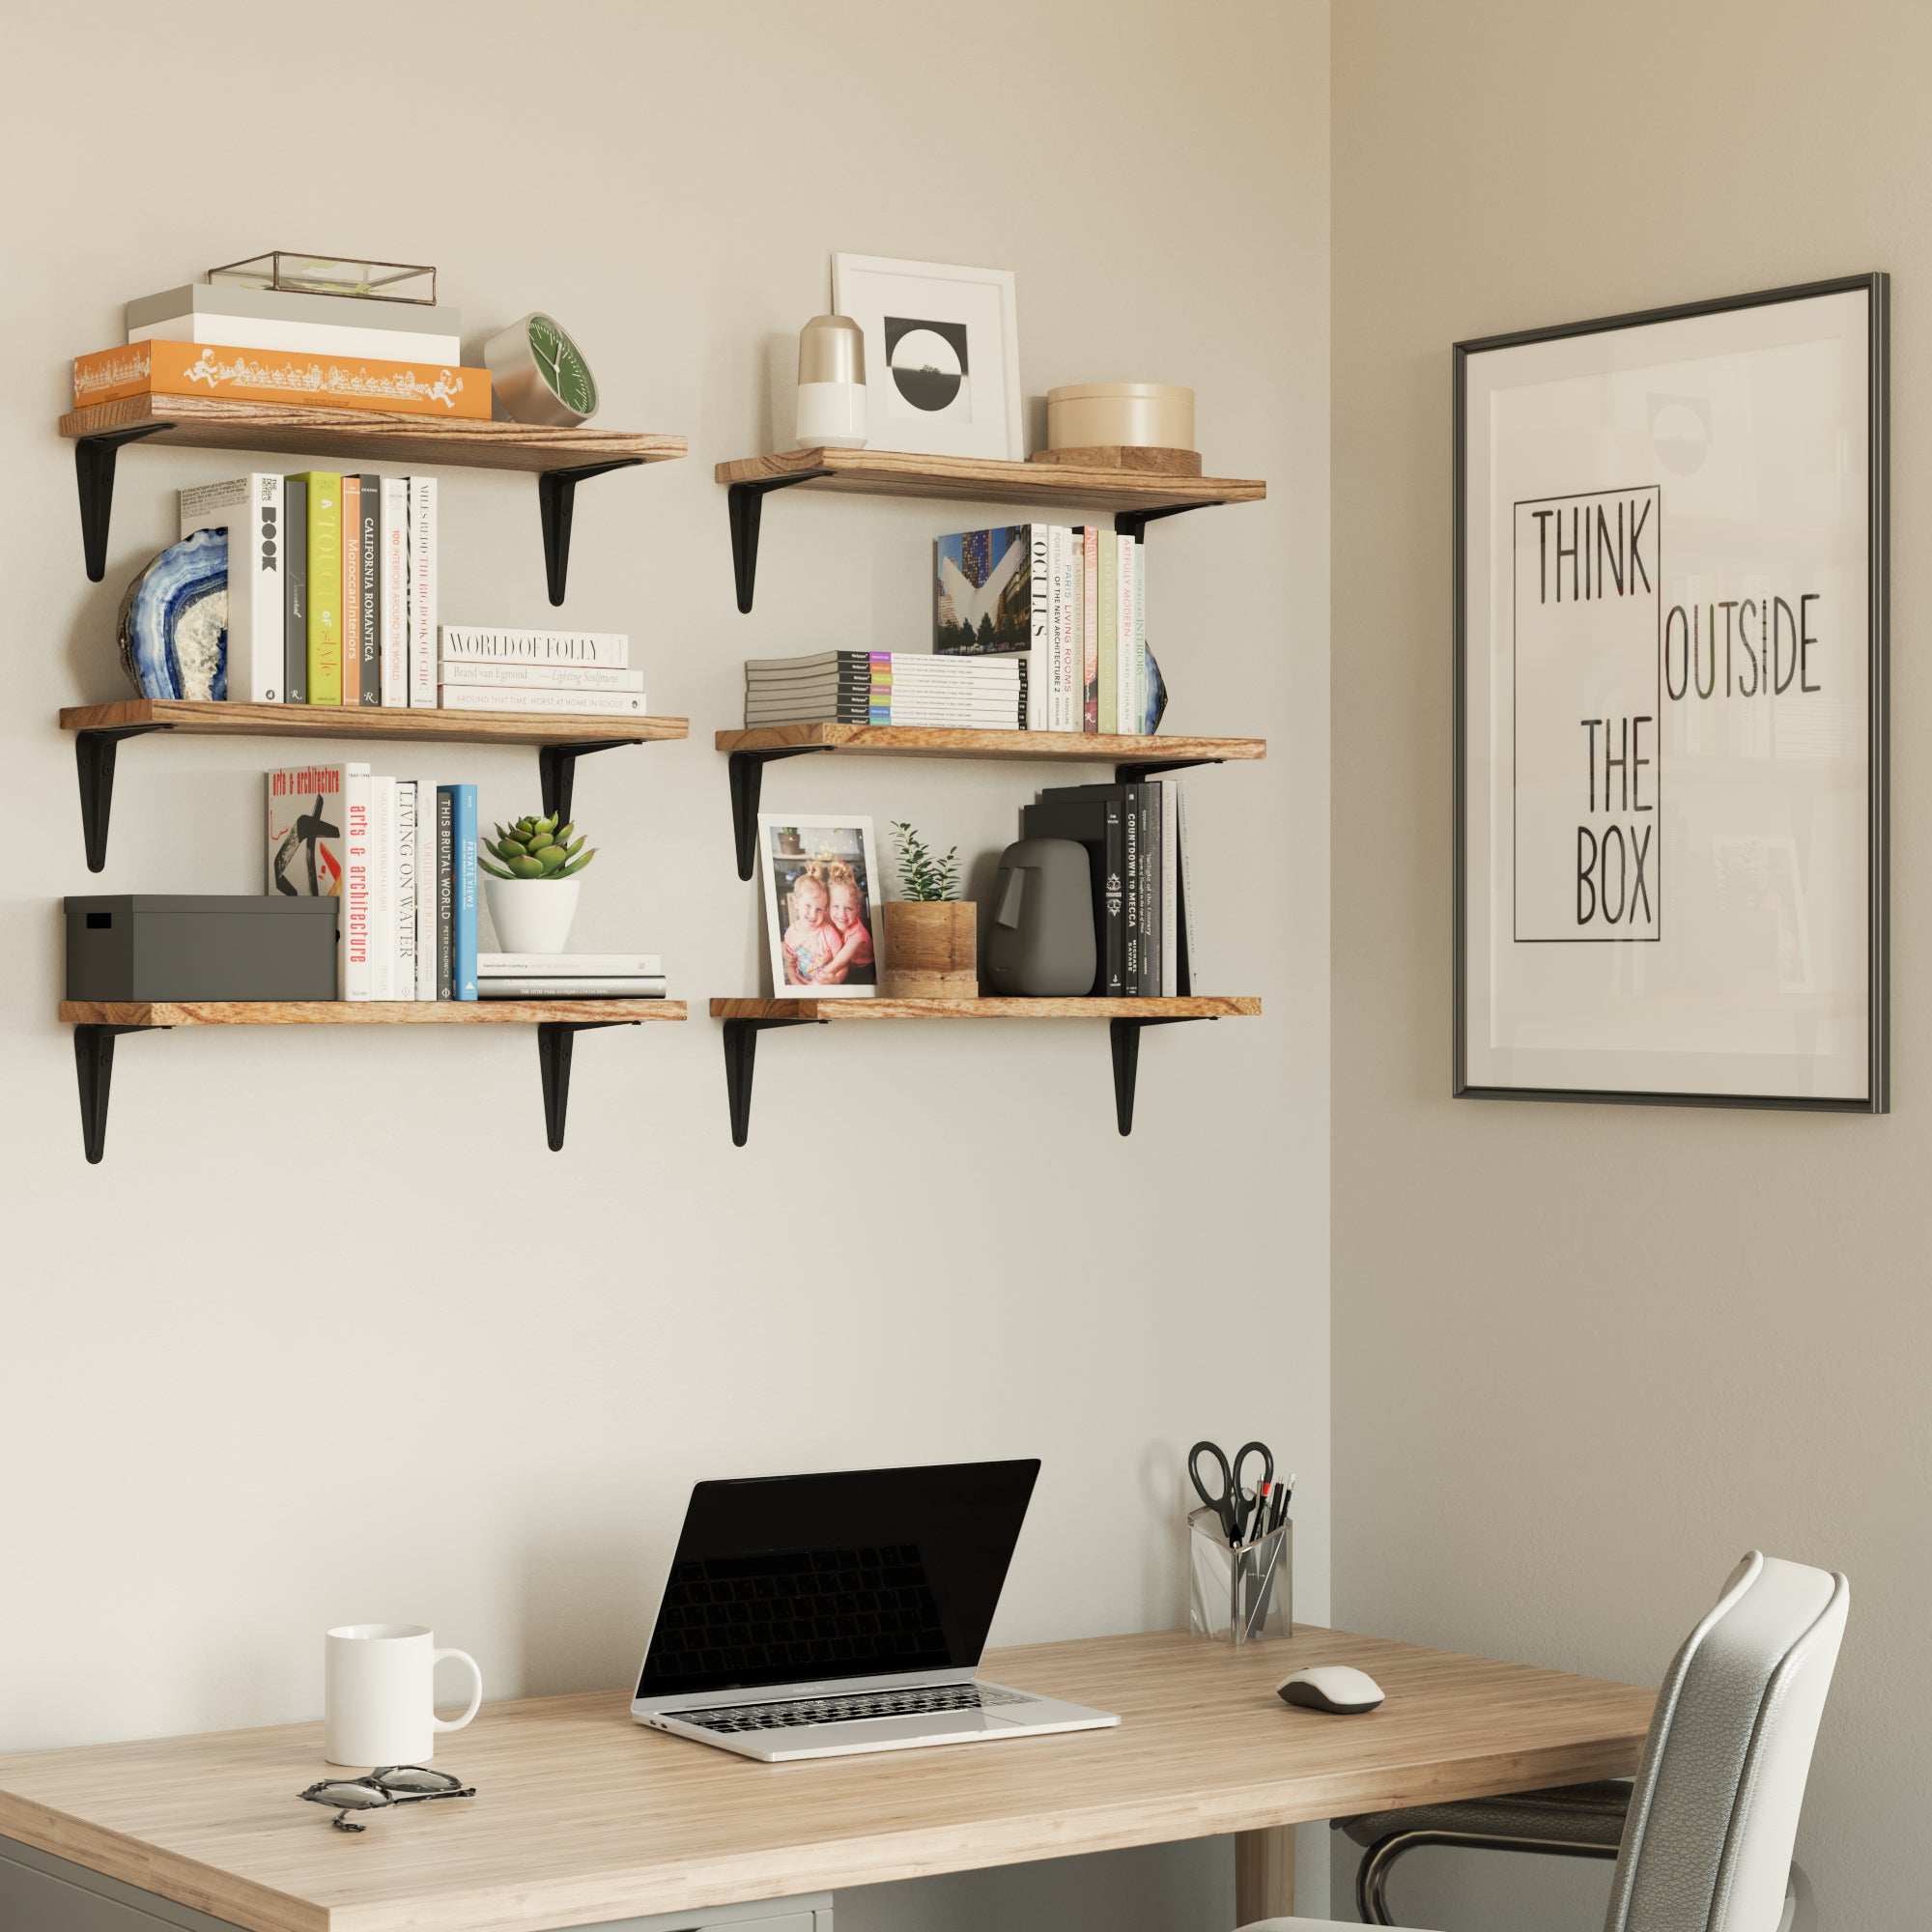 Home office with floating shelves supported by black metal brackets, ideal for books and decor.